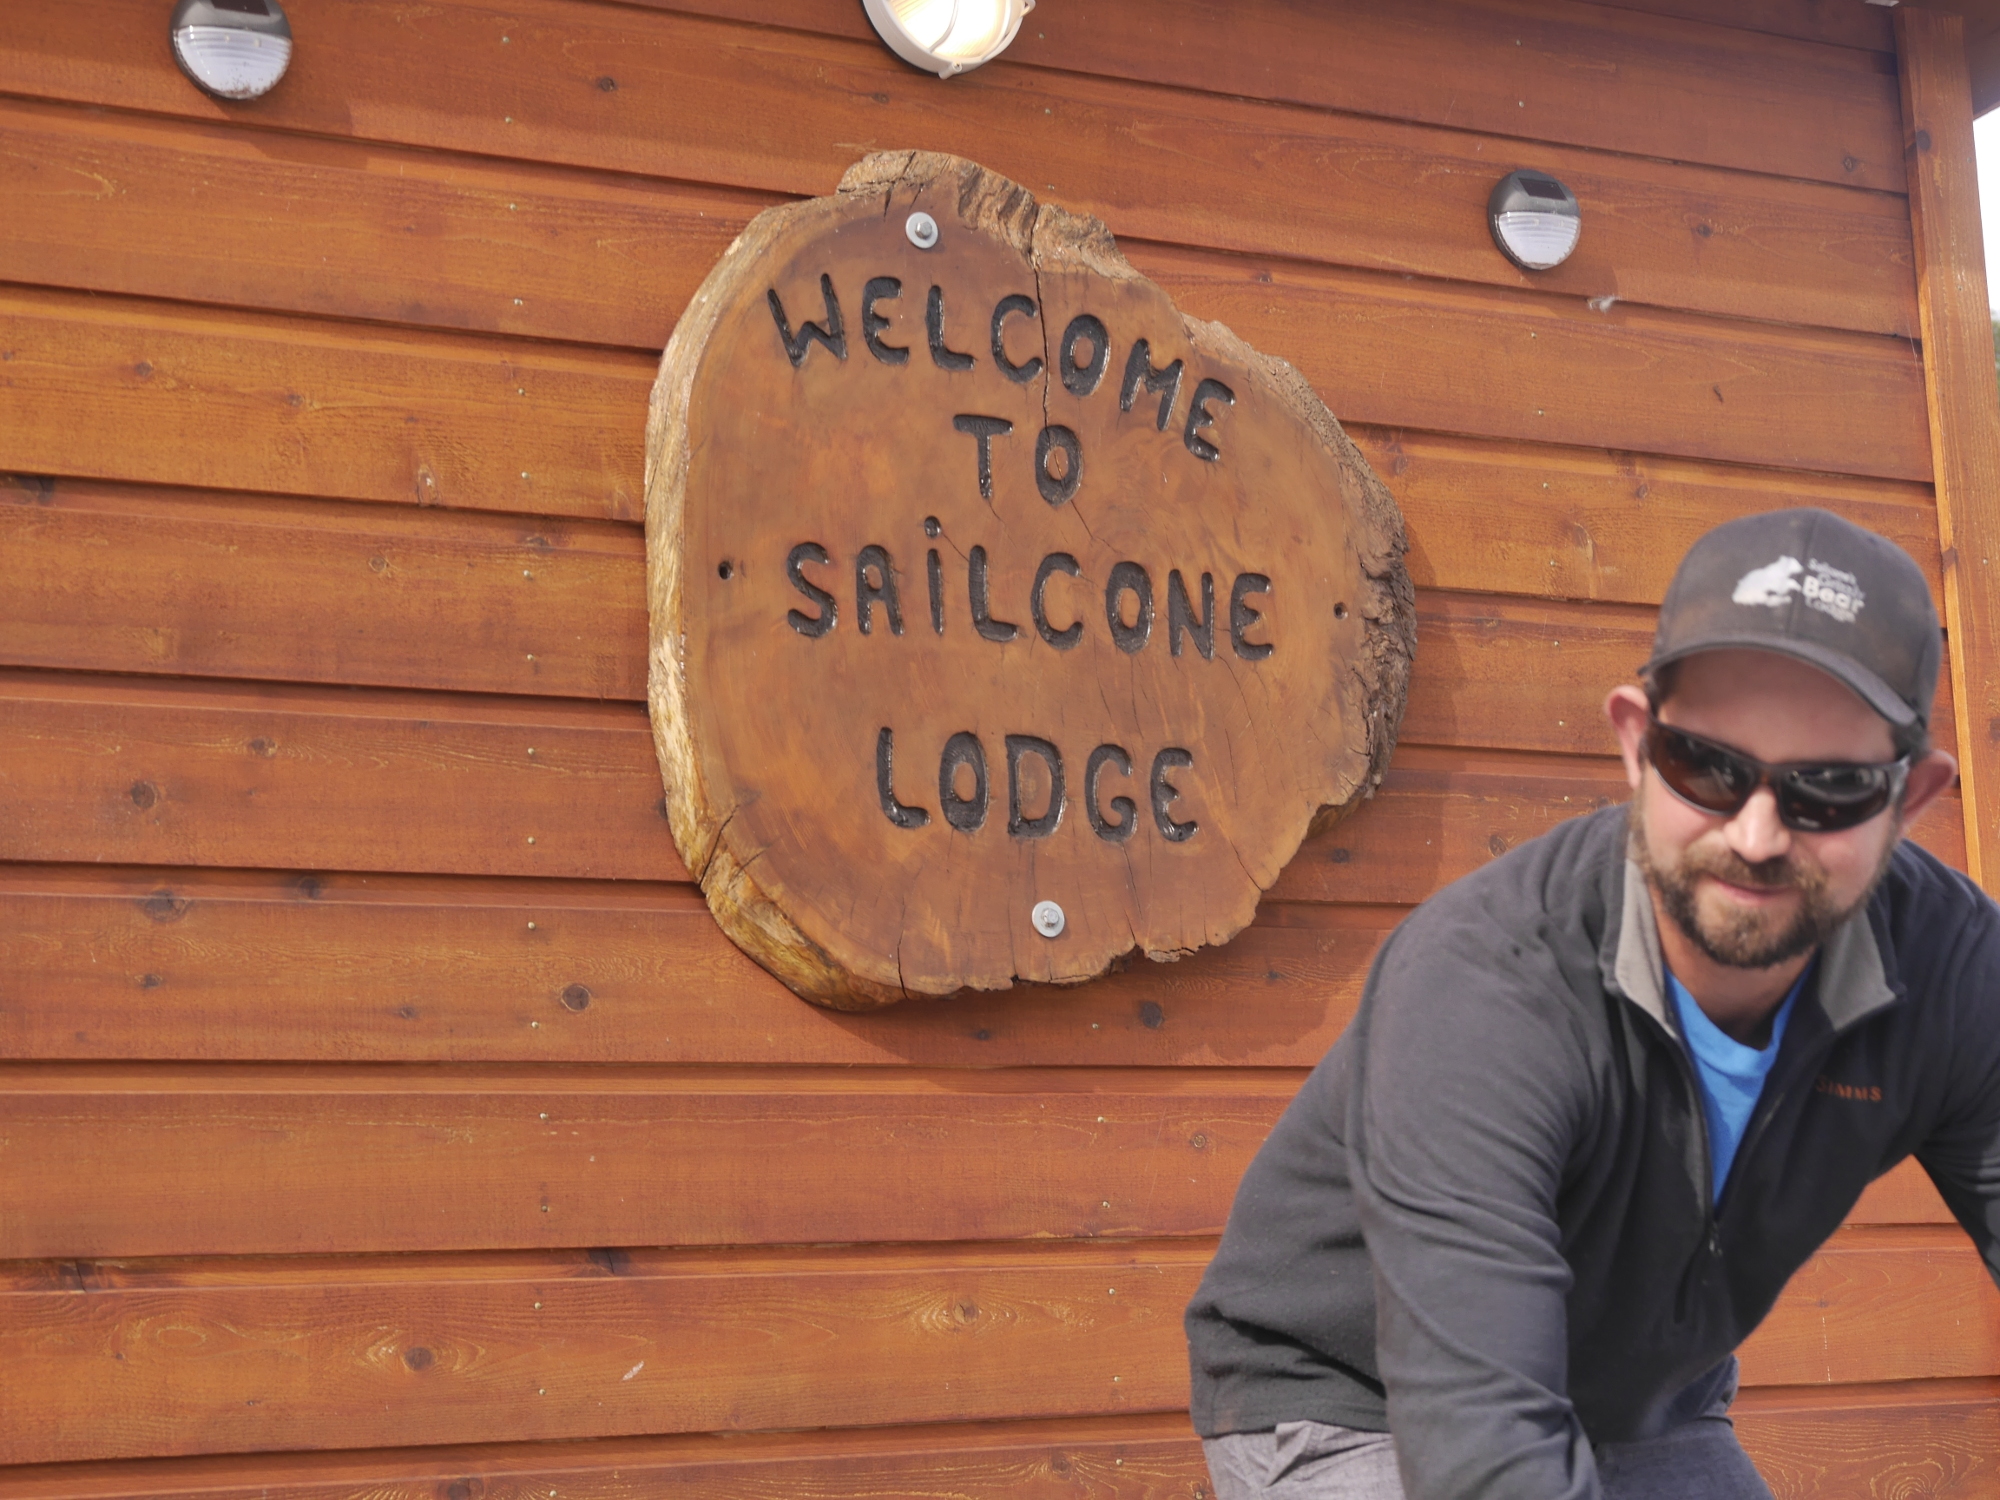 Grizzly Bear Lodge Photos | Sailcone's Grizzly Bear Lodge